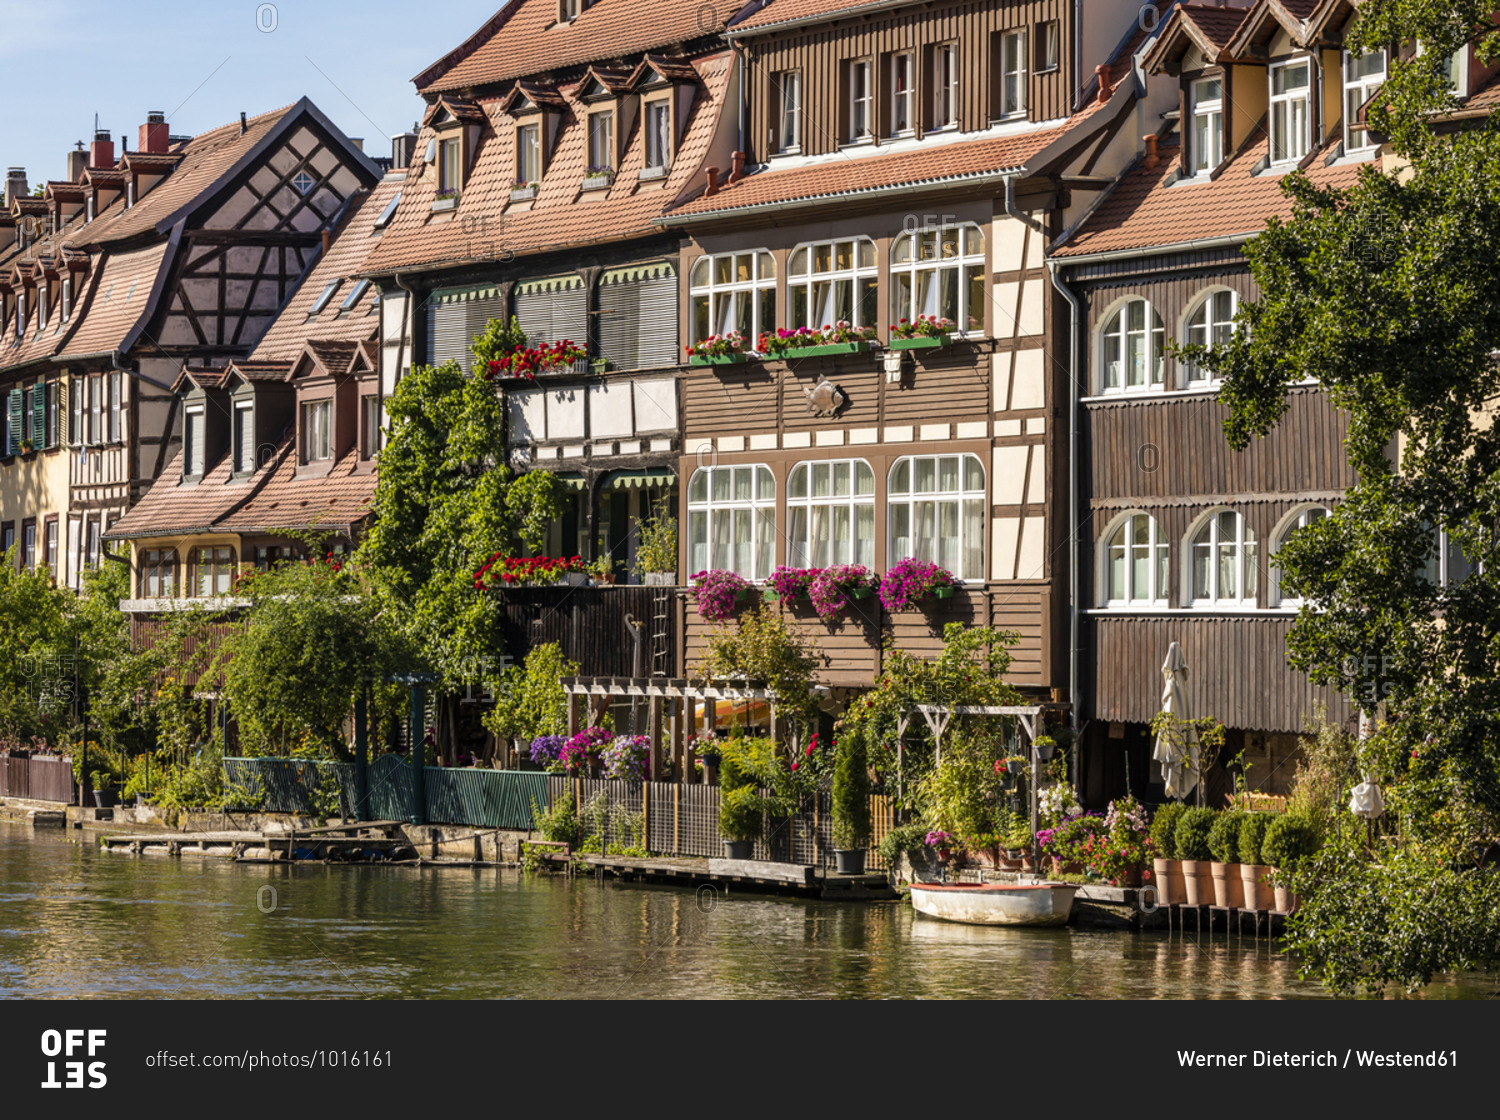 Germany- Bavaria- Bamberg- River Regnitz and Little Venice townhouses in spring